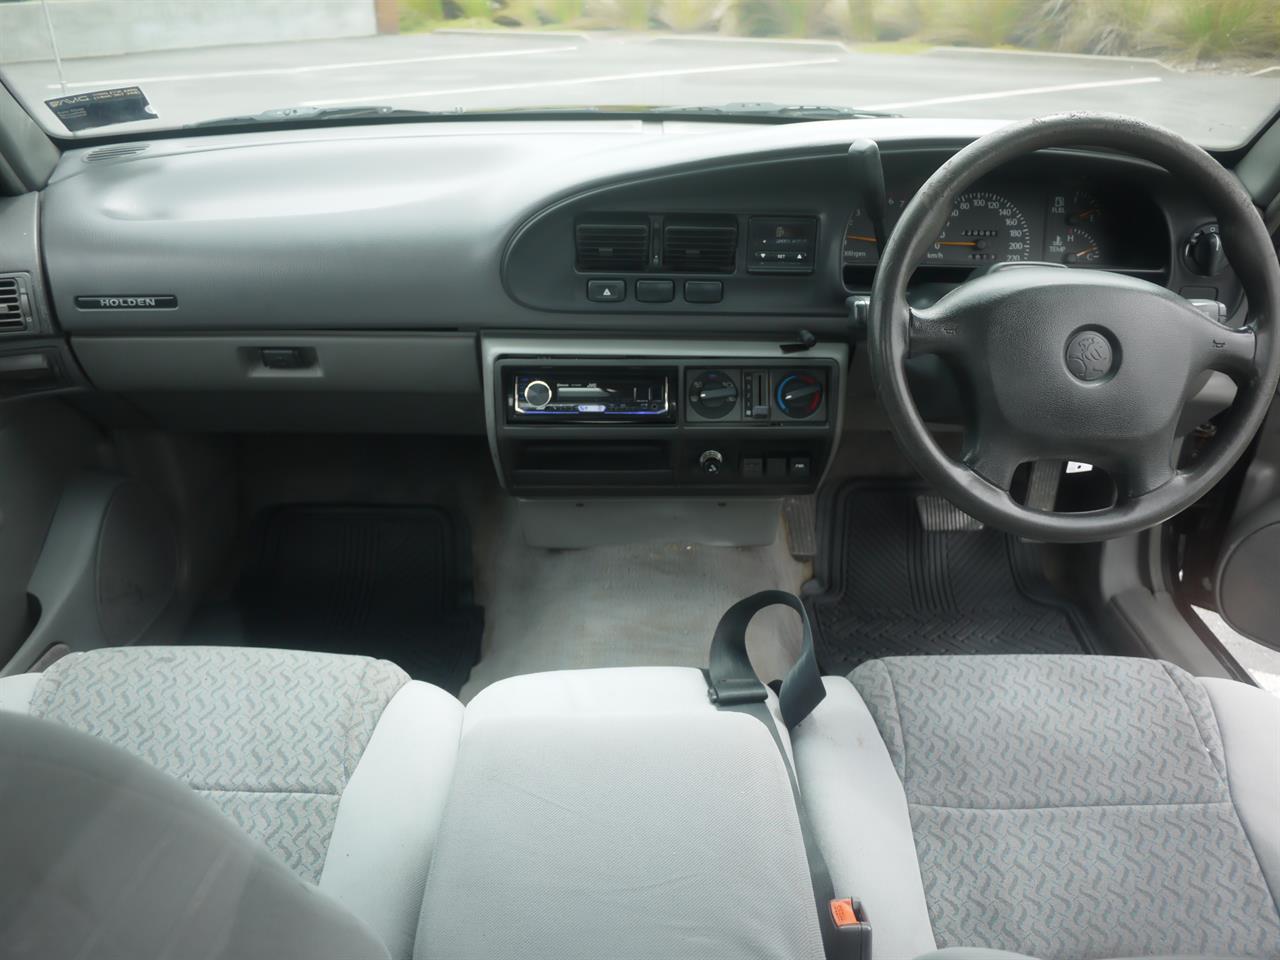 1999 Holden Commodore VS S Bench Col. image 12